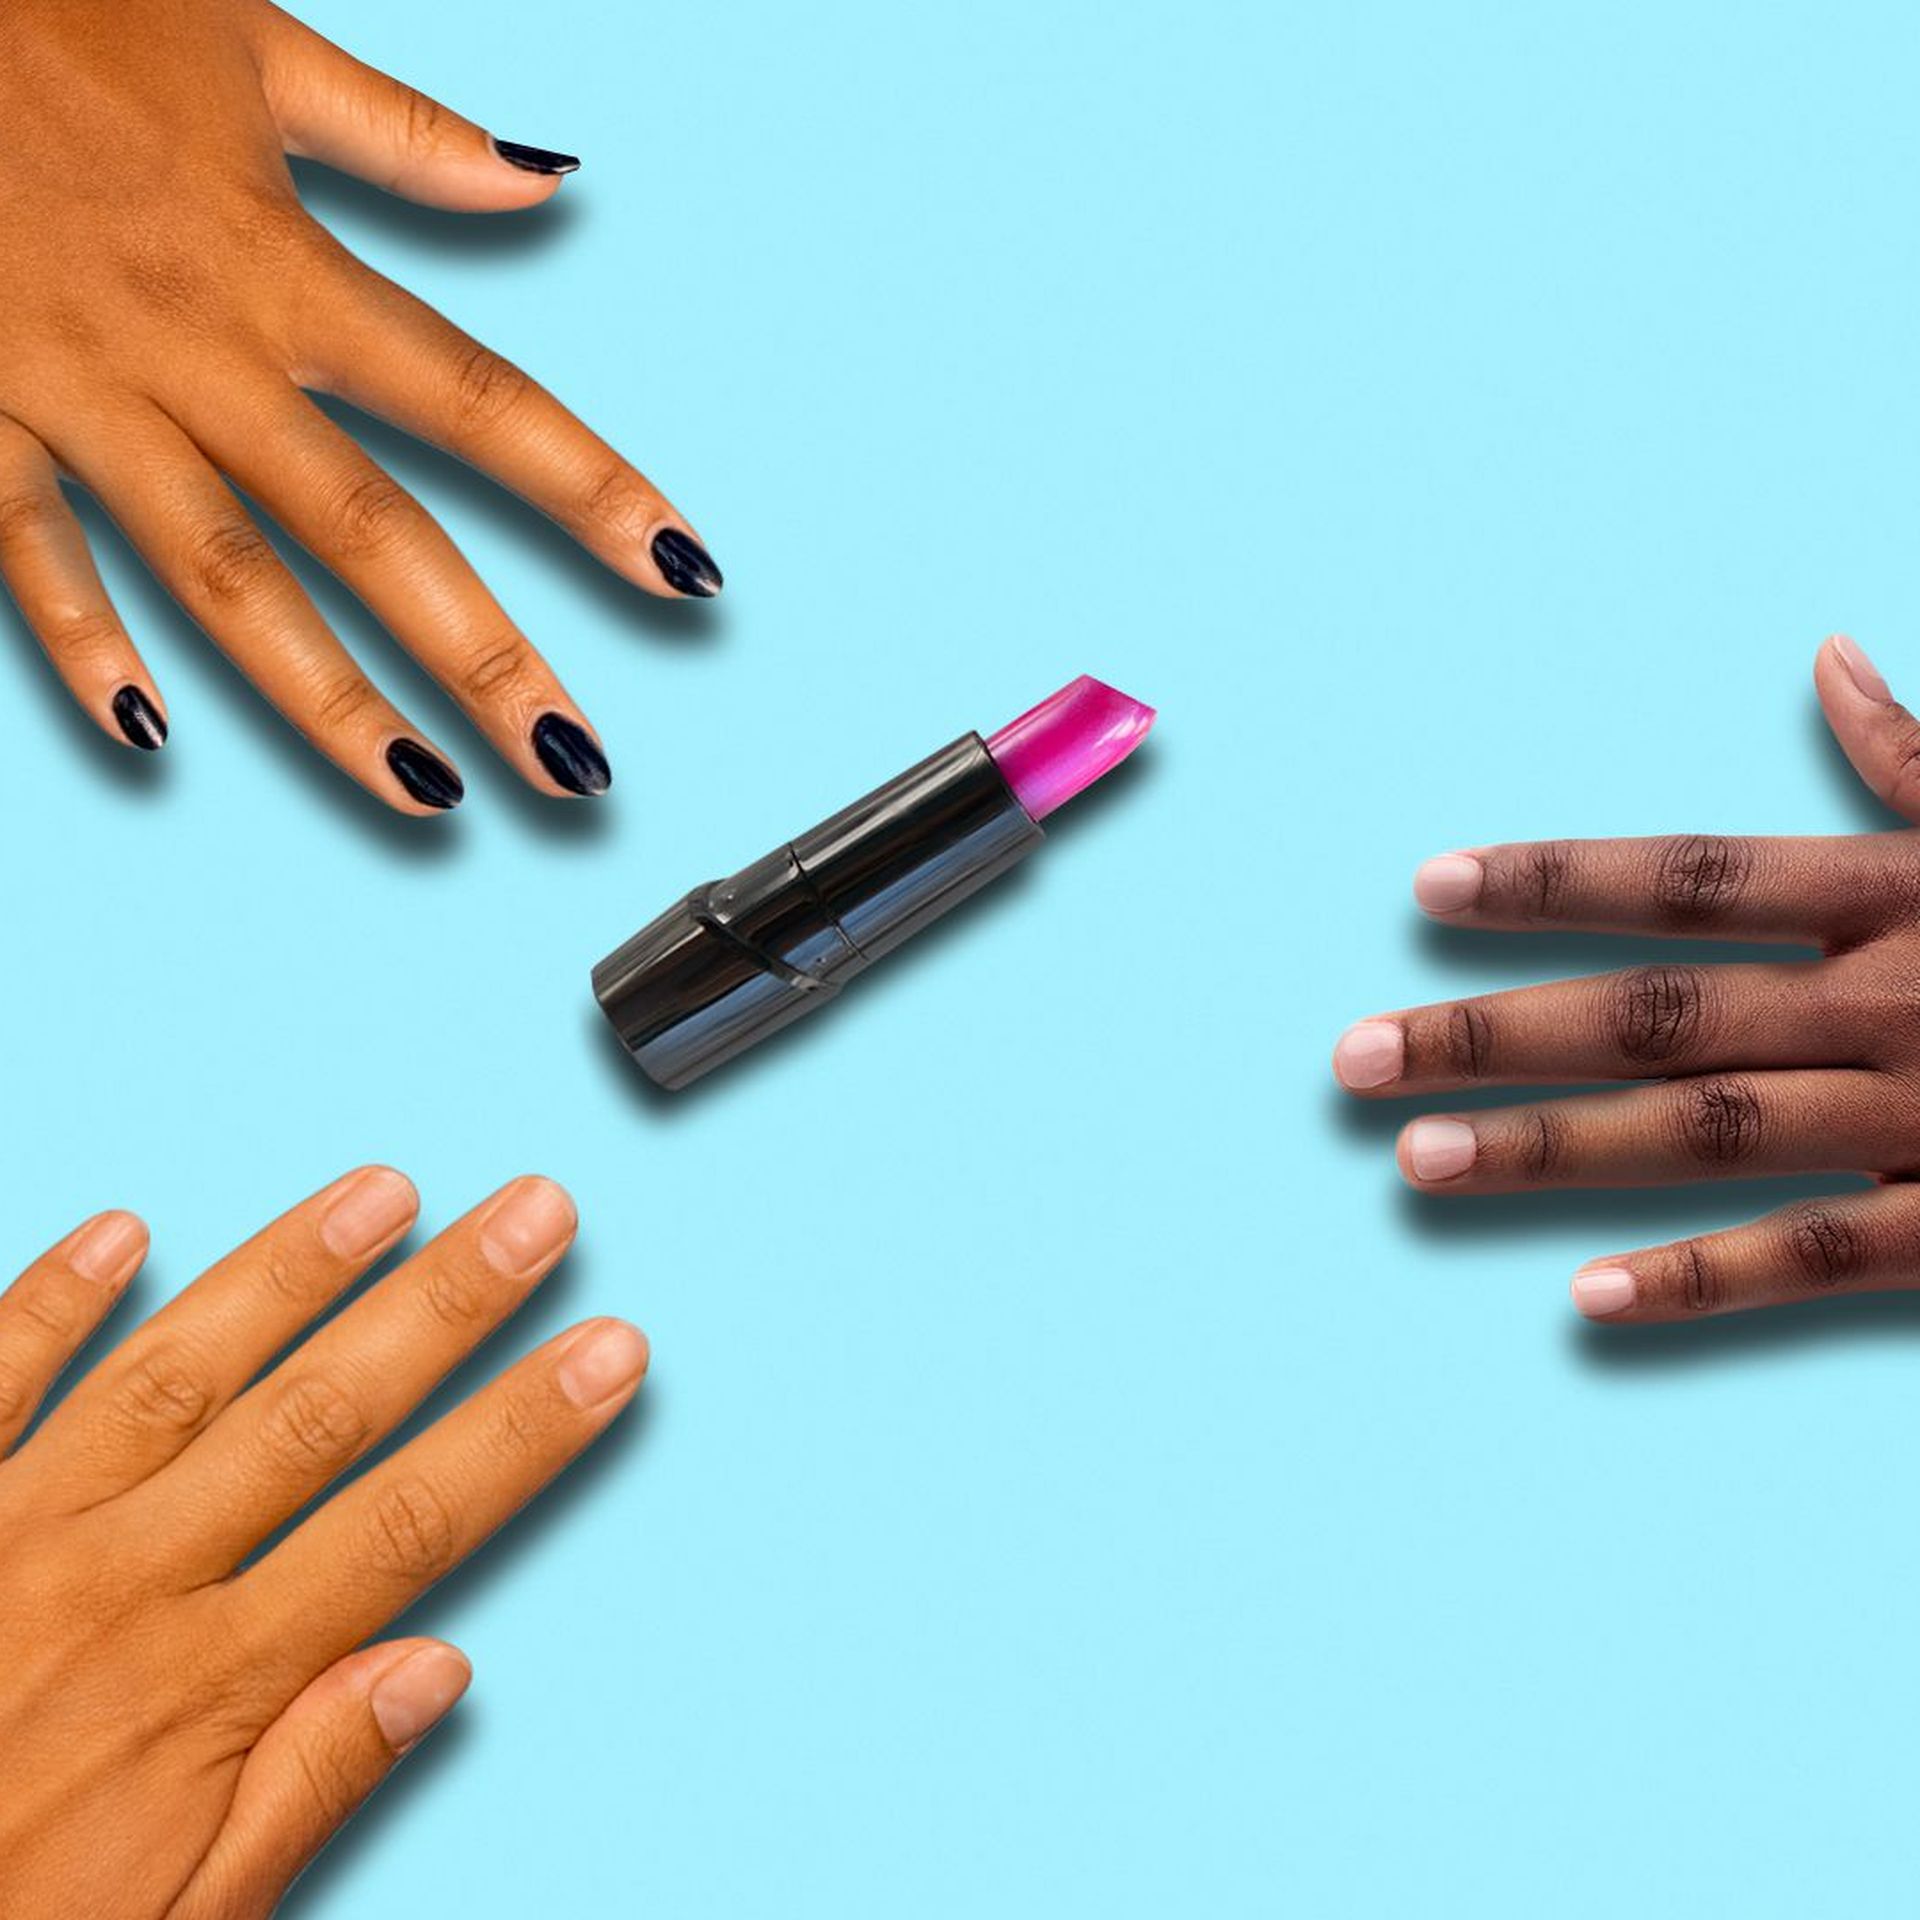 Illustration of three different hands reaching for one lipstick